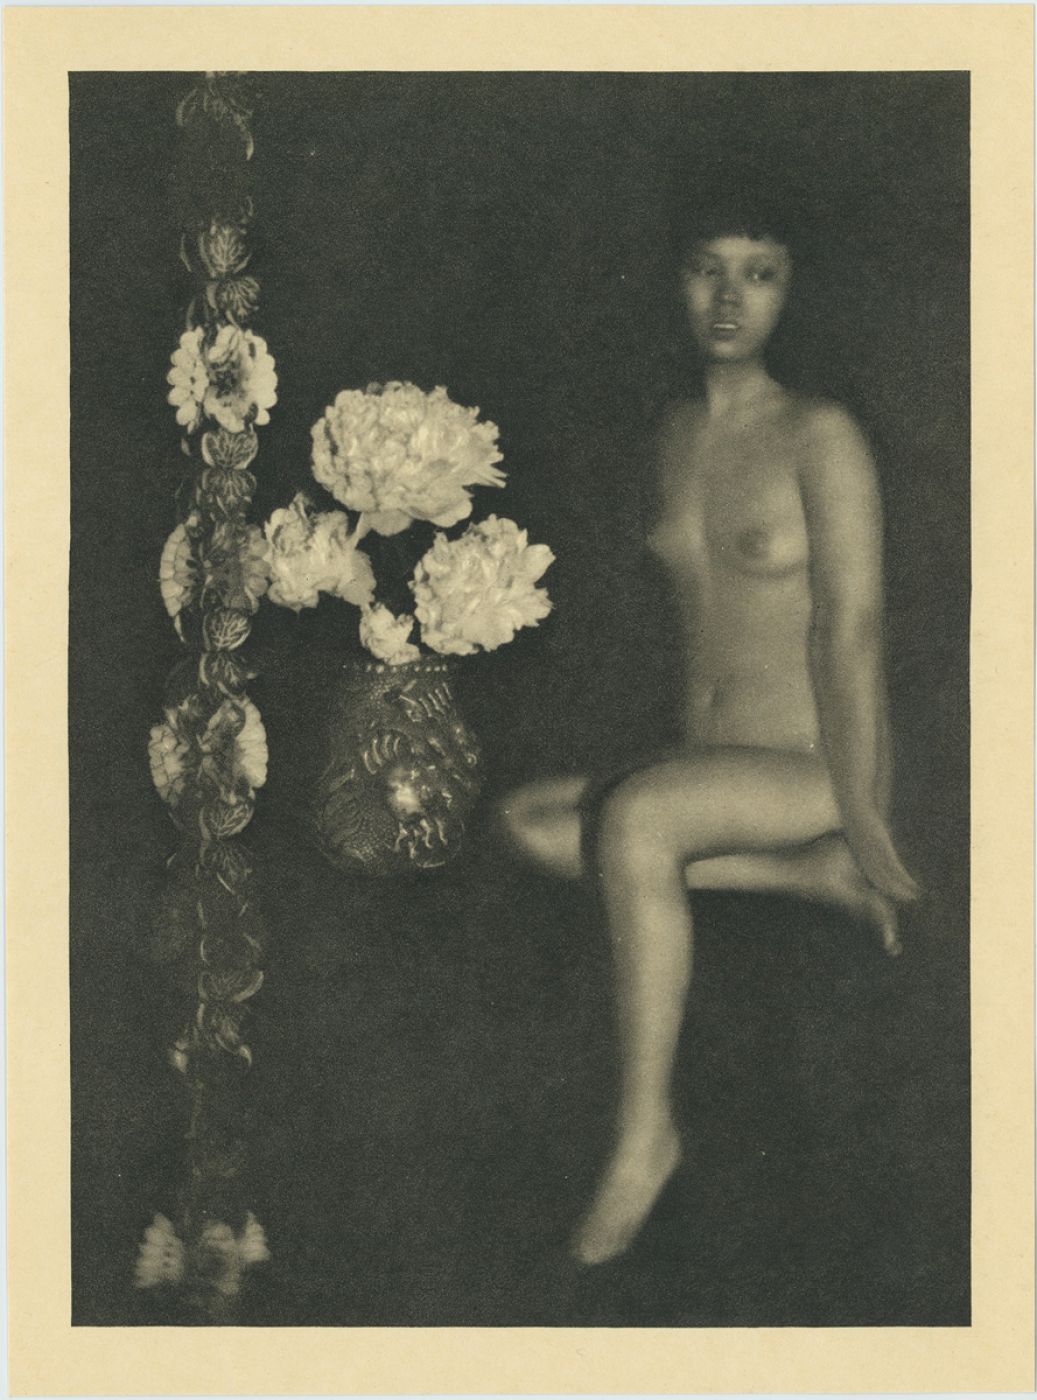 Heinz von Perckhammer, “The culture of the Nude in China”, 1920 ca.